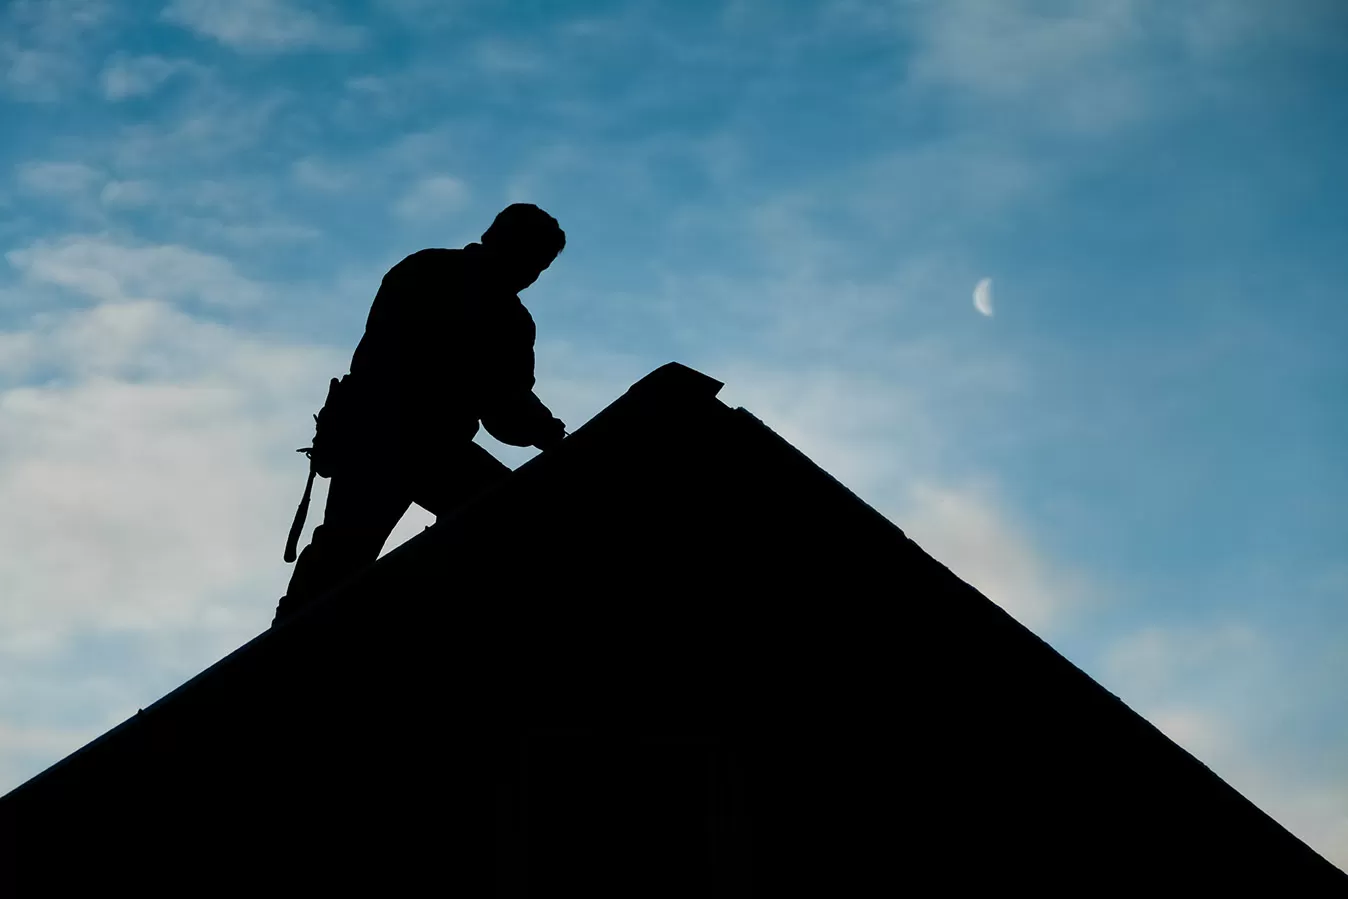 Roofers, Roofing Contractor on rooftop in the evening of an El Paso home